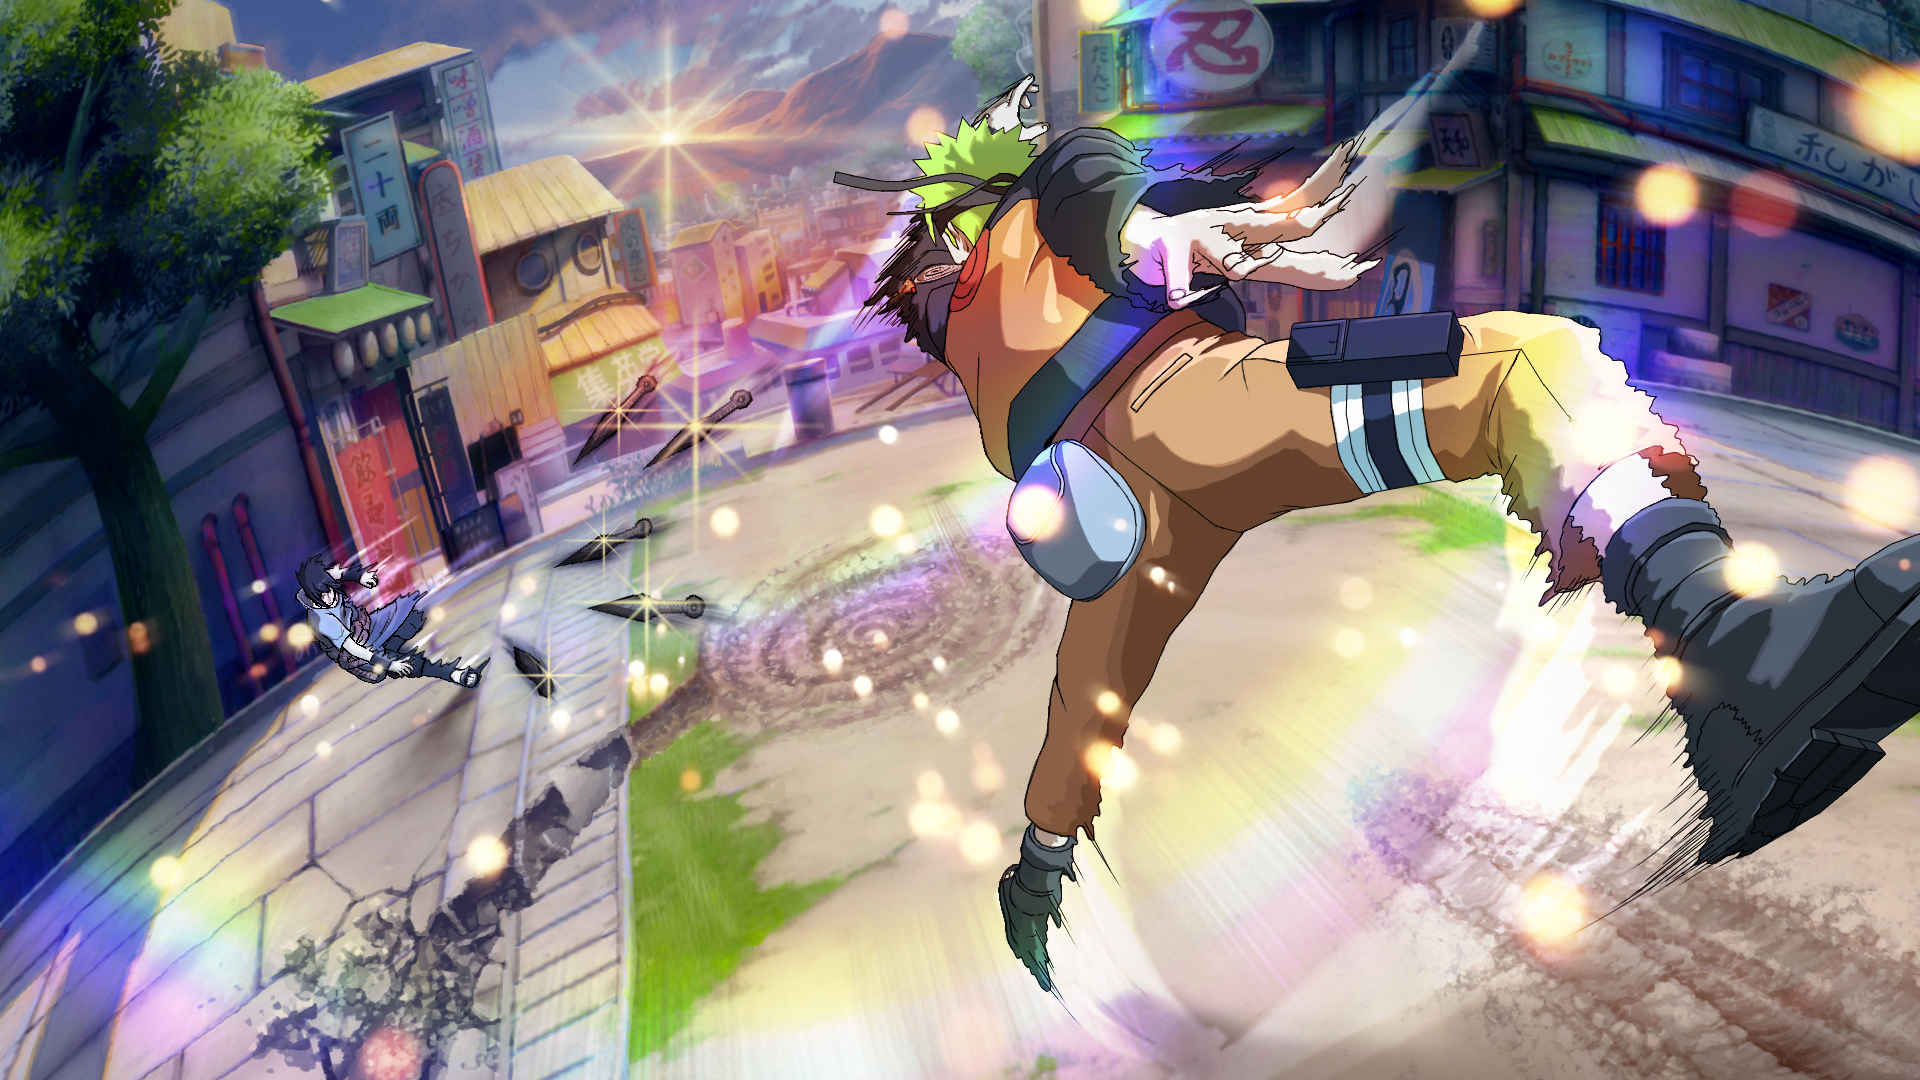 Latest Naruto Storm 4 Scan Reveals More Details On The Wall